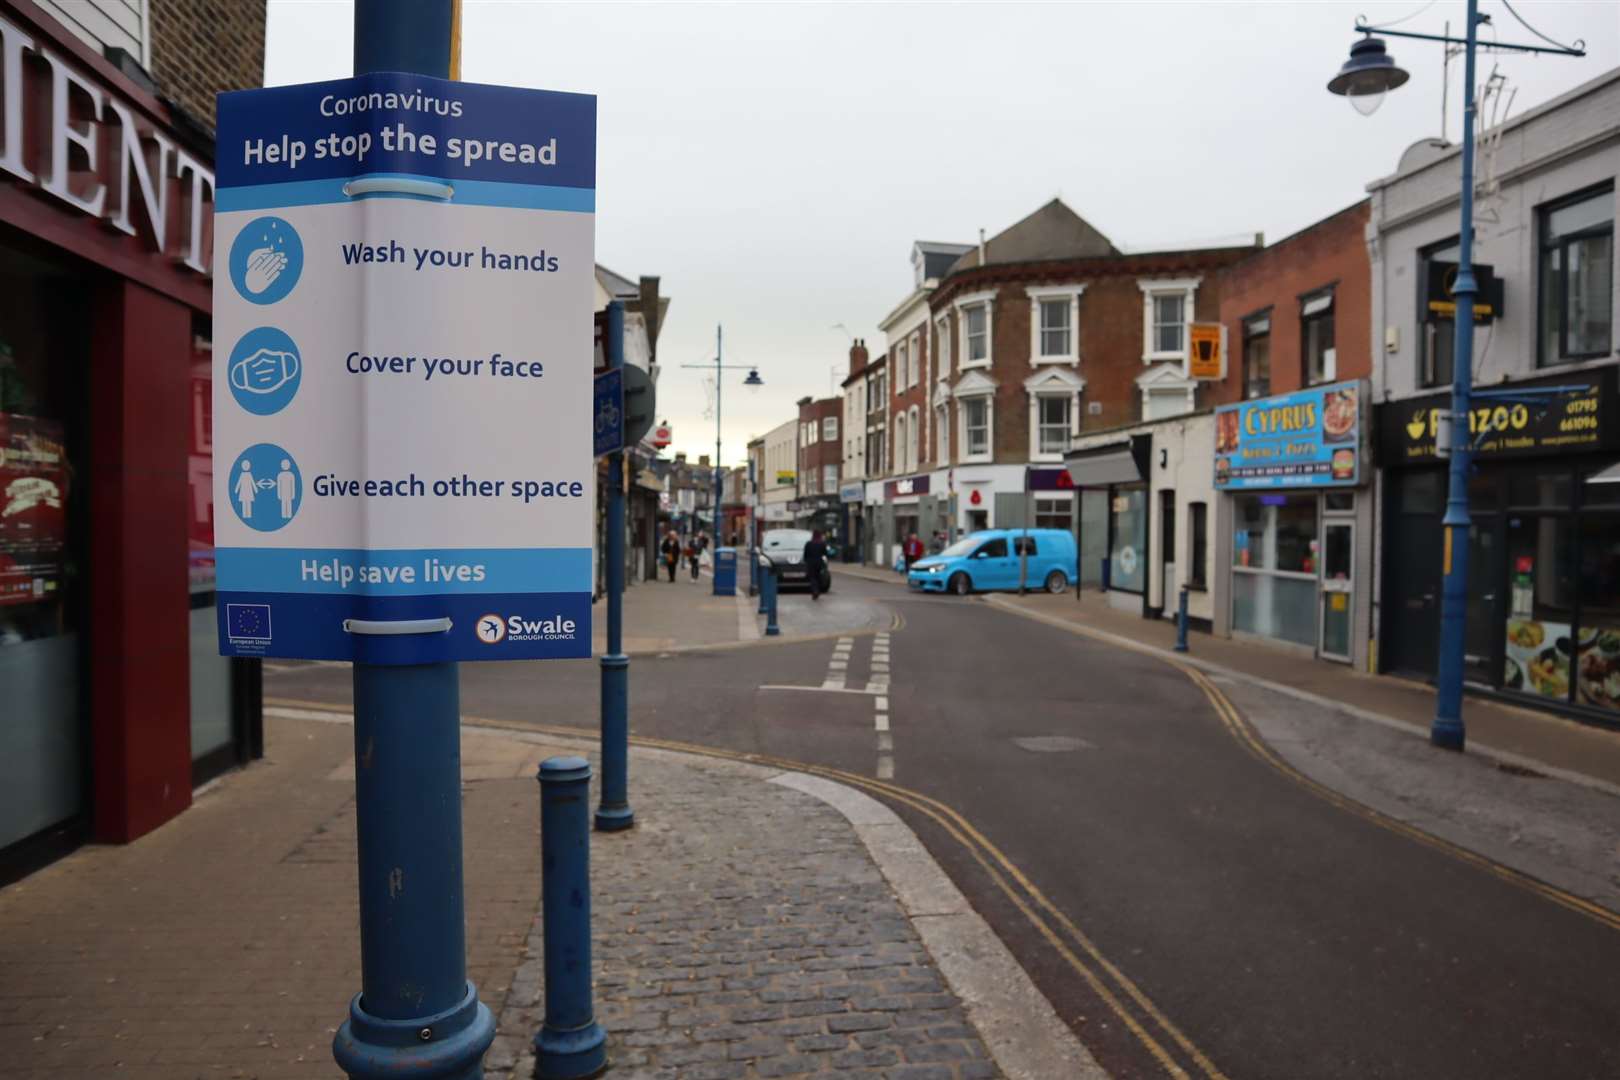 A coronavirus warning in Sheerness High Street. Swale at one point had some of the highest Covid case rates in the country